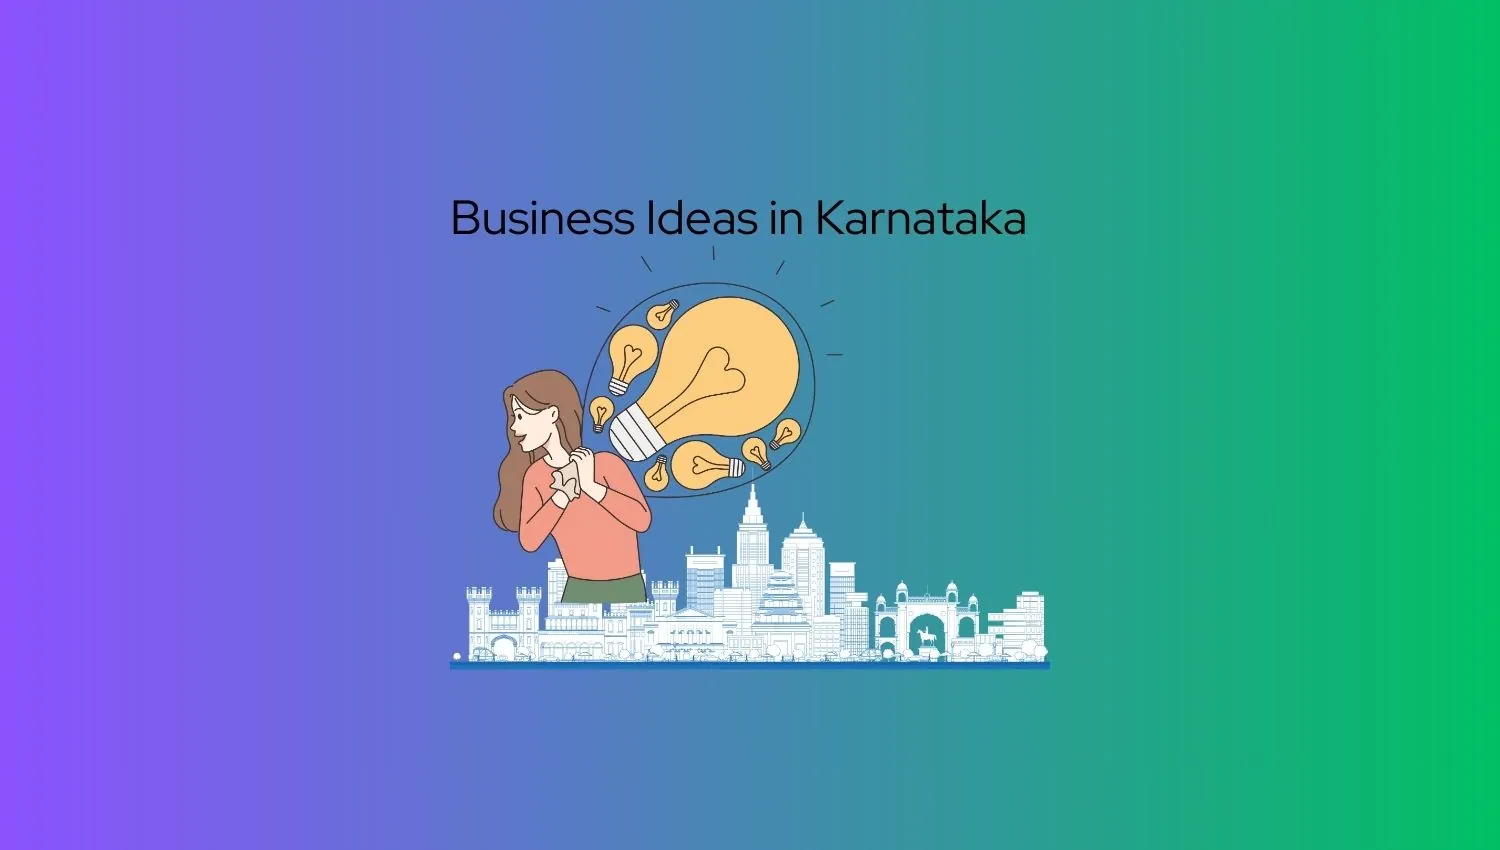 Business Ideas in Karnataka for Start up business in India